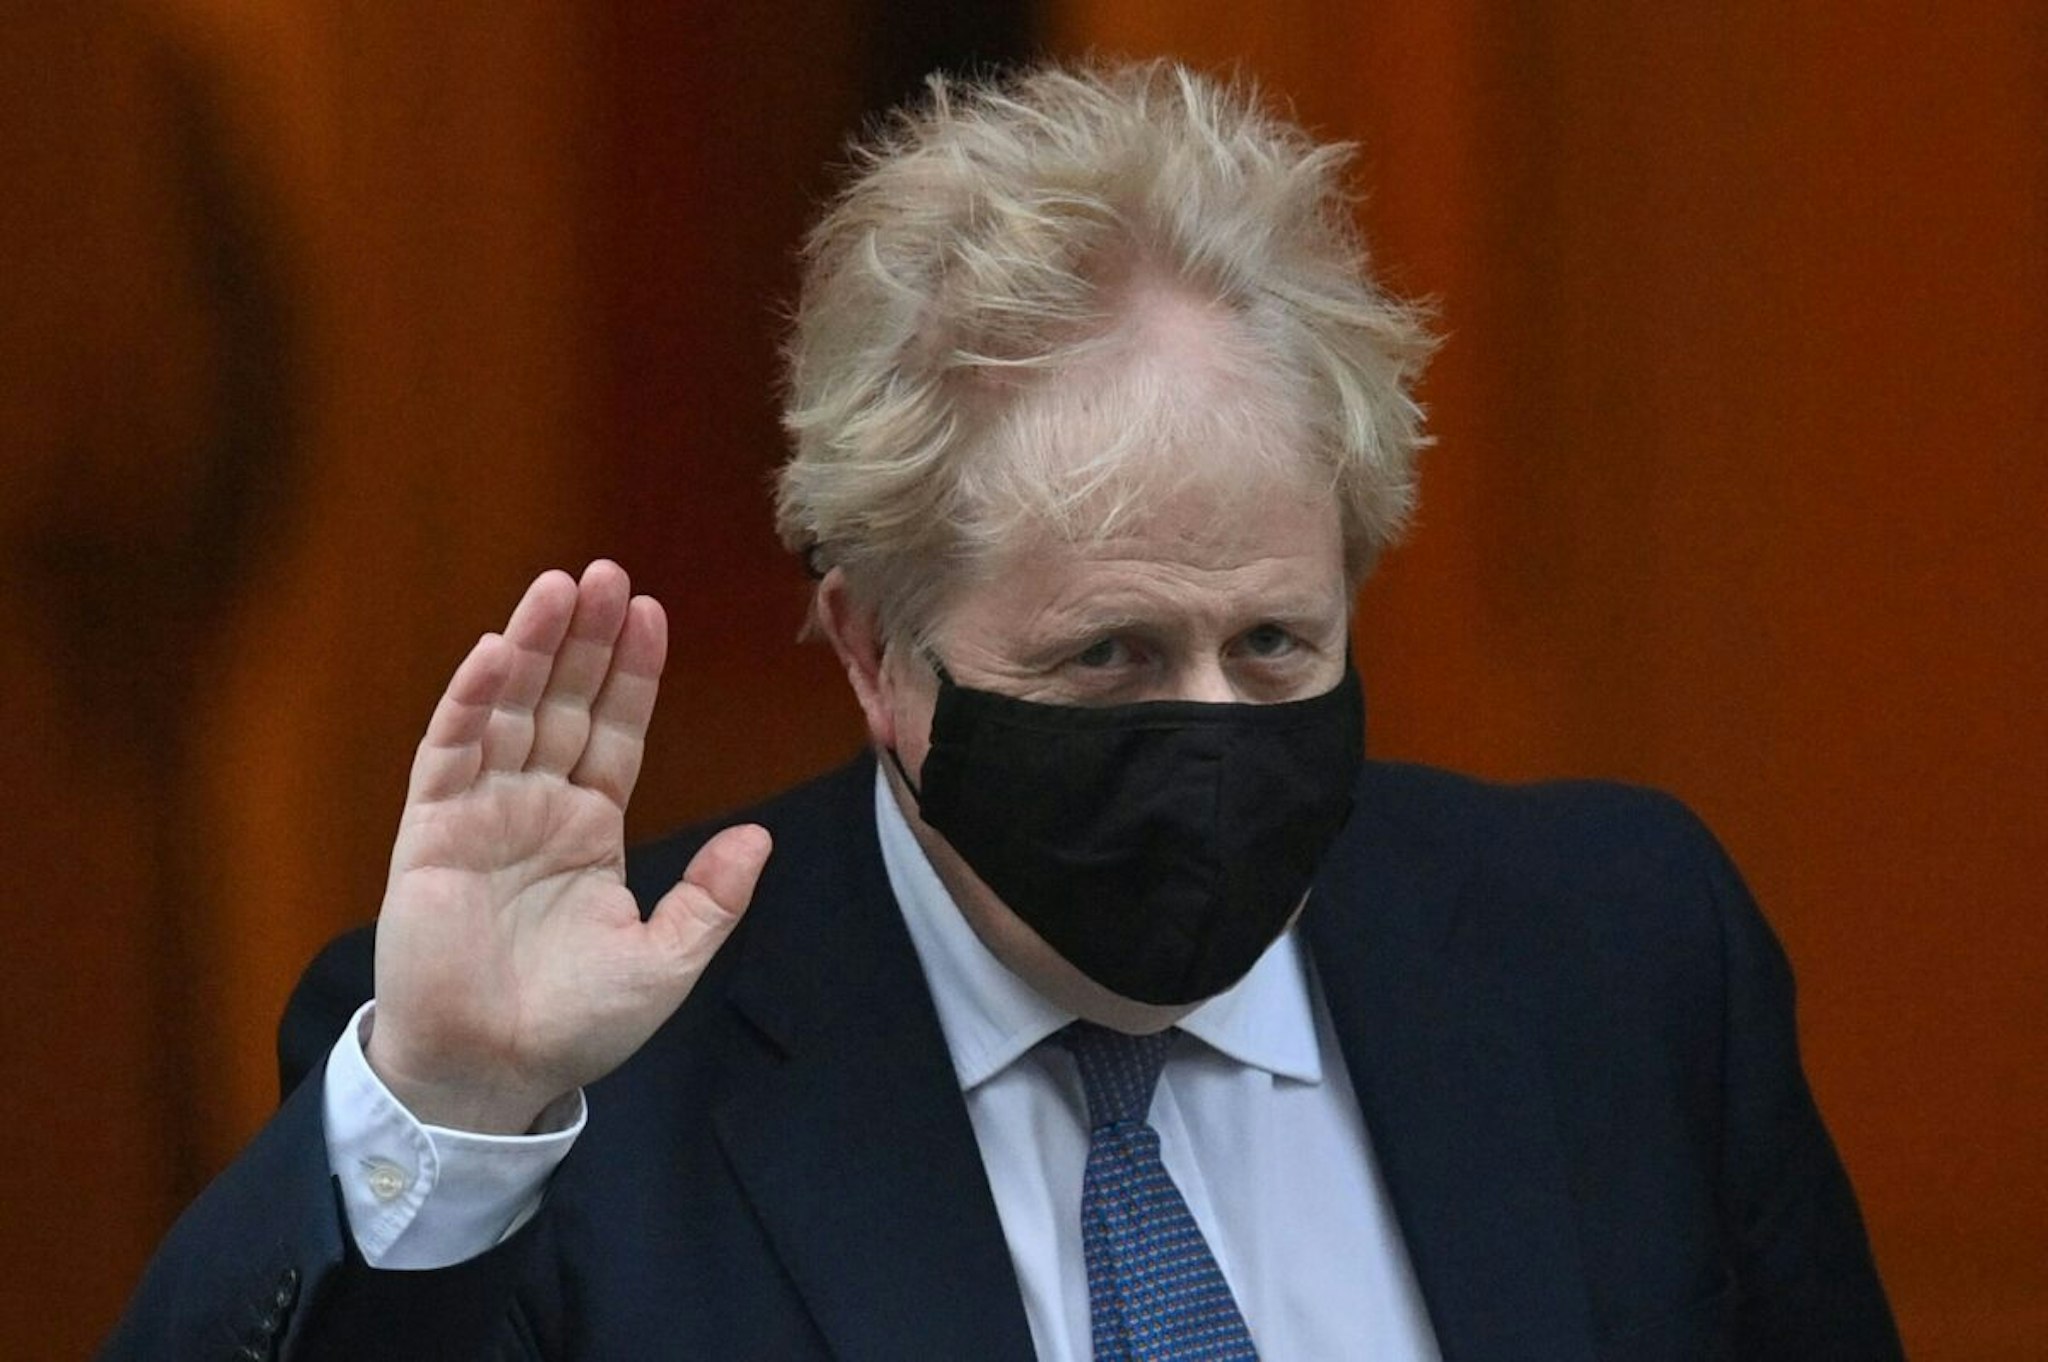 Britain's Prime Minister Boris Johnson, wearing a face covering to help mitigate the spread of coronavirus, leaves from 10 Downing Street in central London on January 5, 2022, to take part in the weekly session of Prime Minister Questions (PMQs) at the House of Commons.